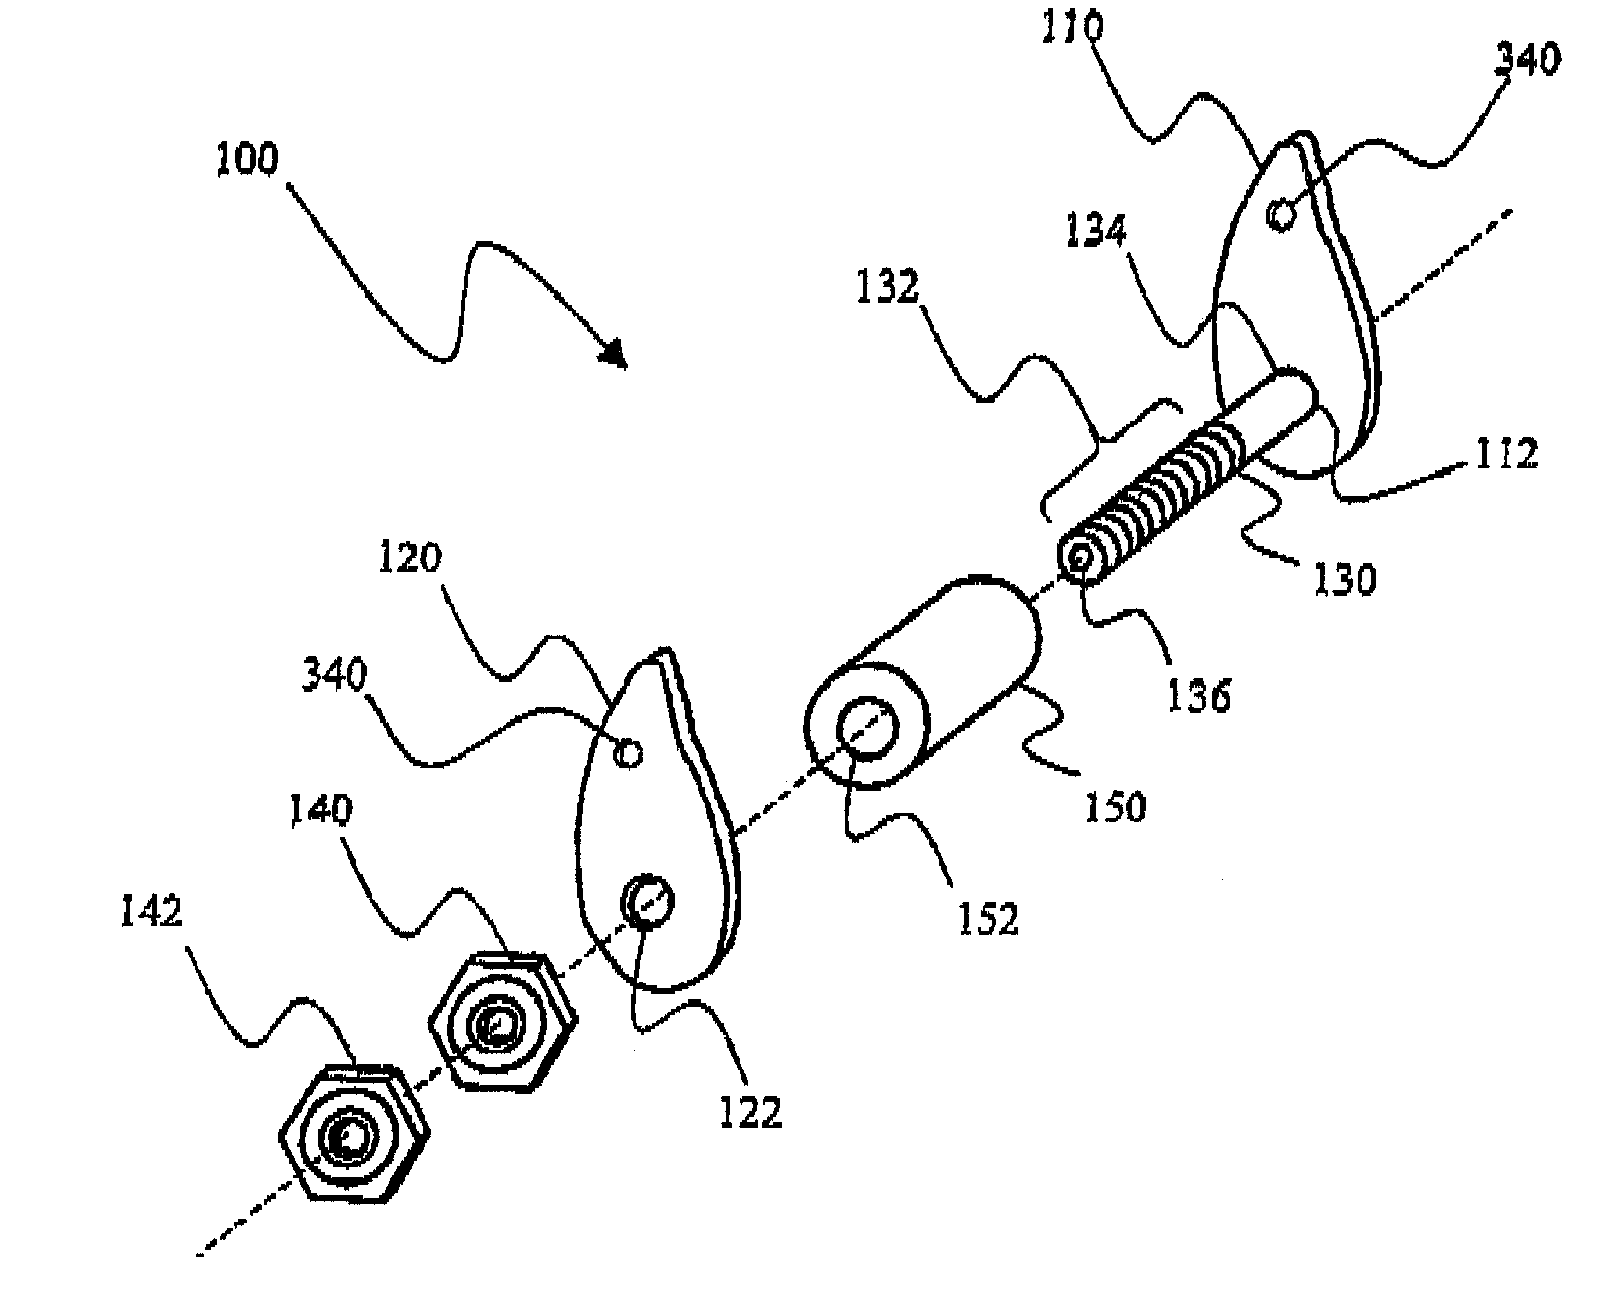 Interspinous internal fixation/distraction device